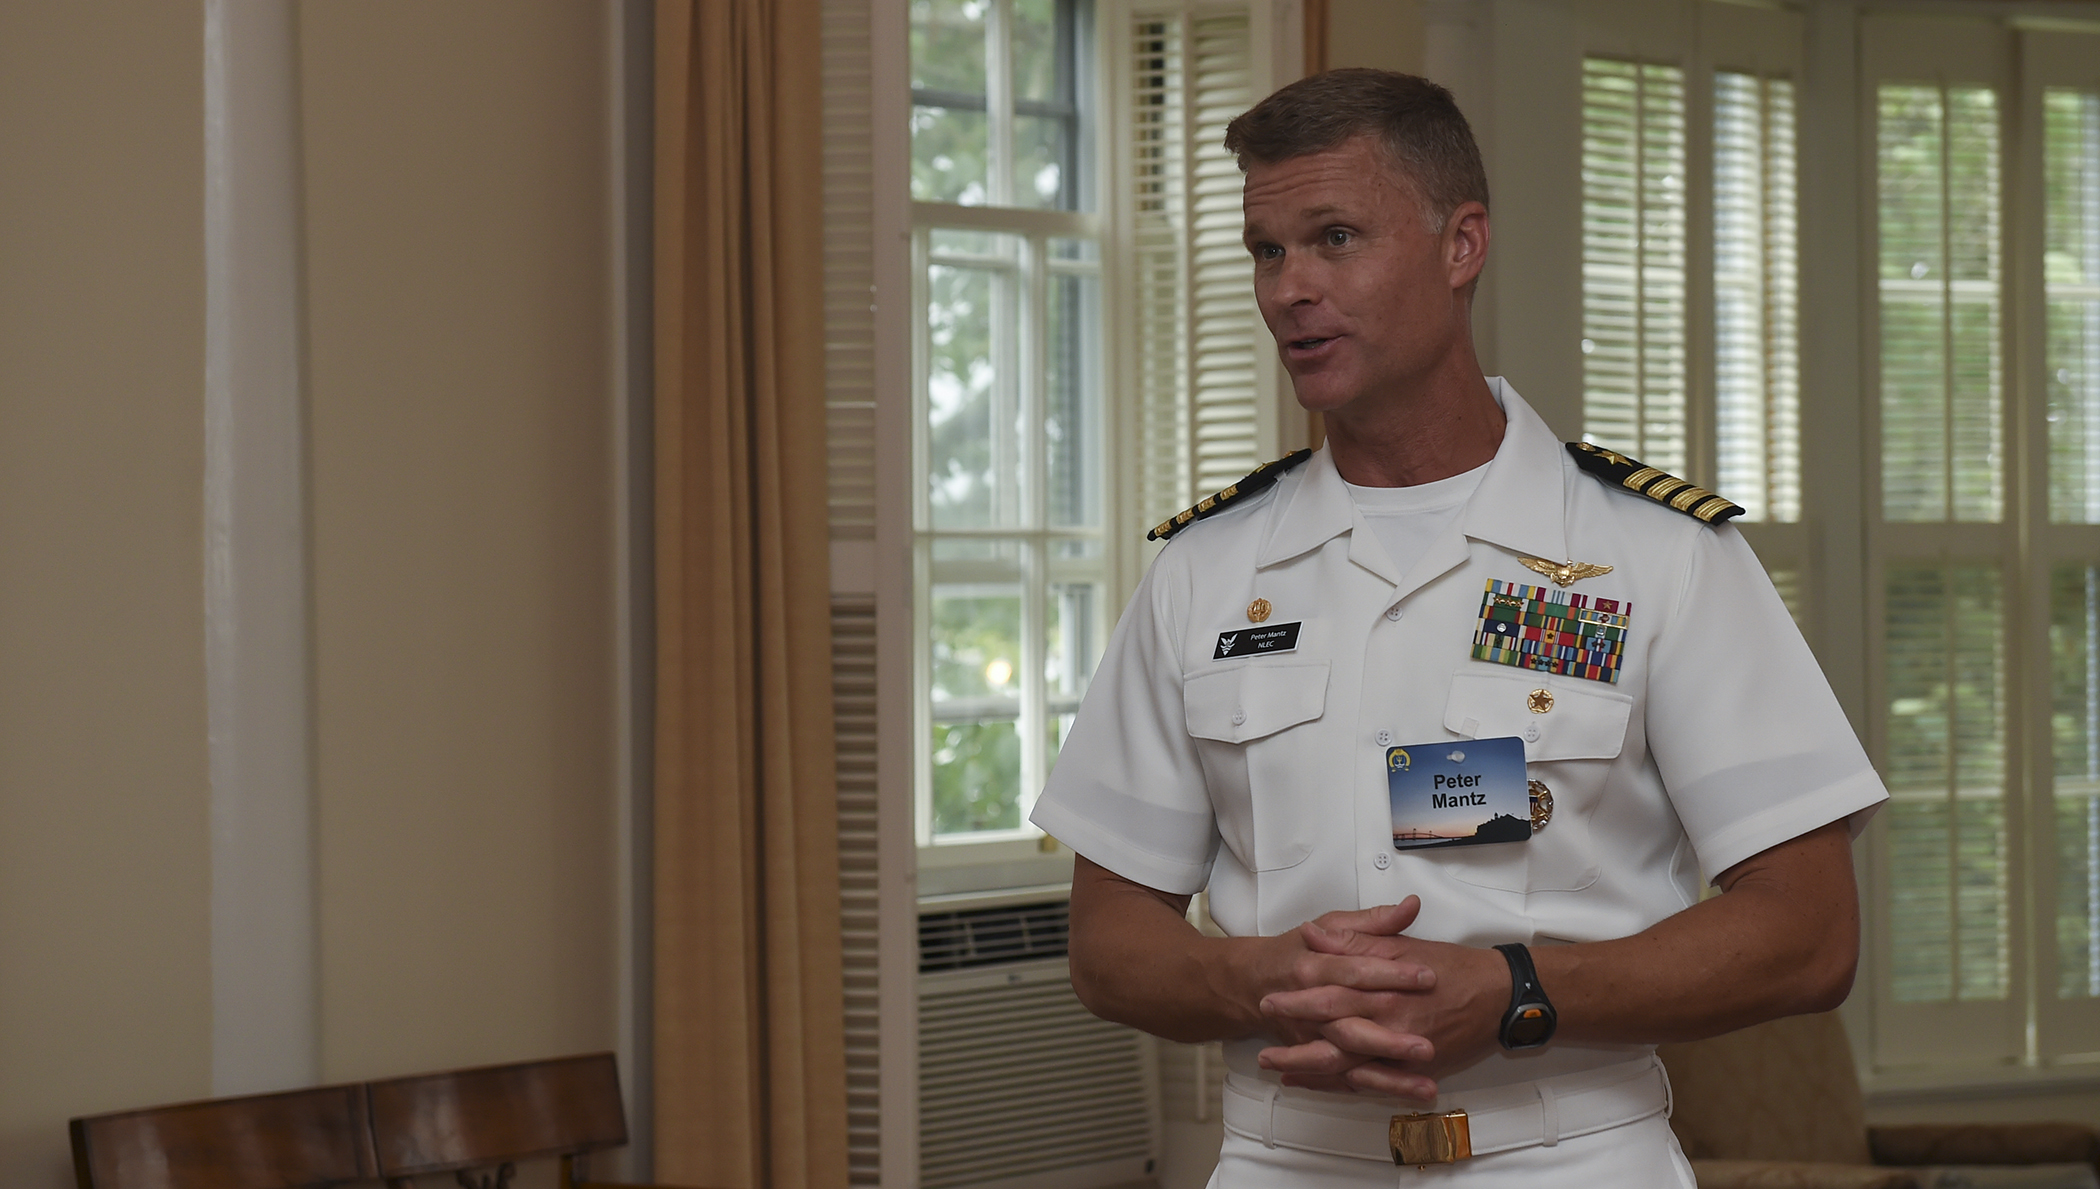 Capt. Peter M. Mantz, commanding officer, Navy Leadership and Ethics Center, provides remarks at the Command Spouse Leadership Course (CSLC) 20th anniversary gathering. 